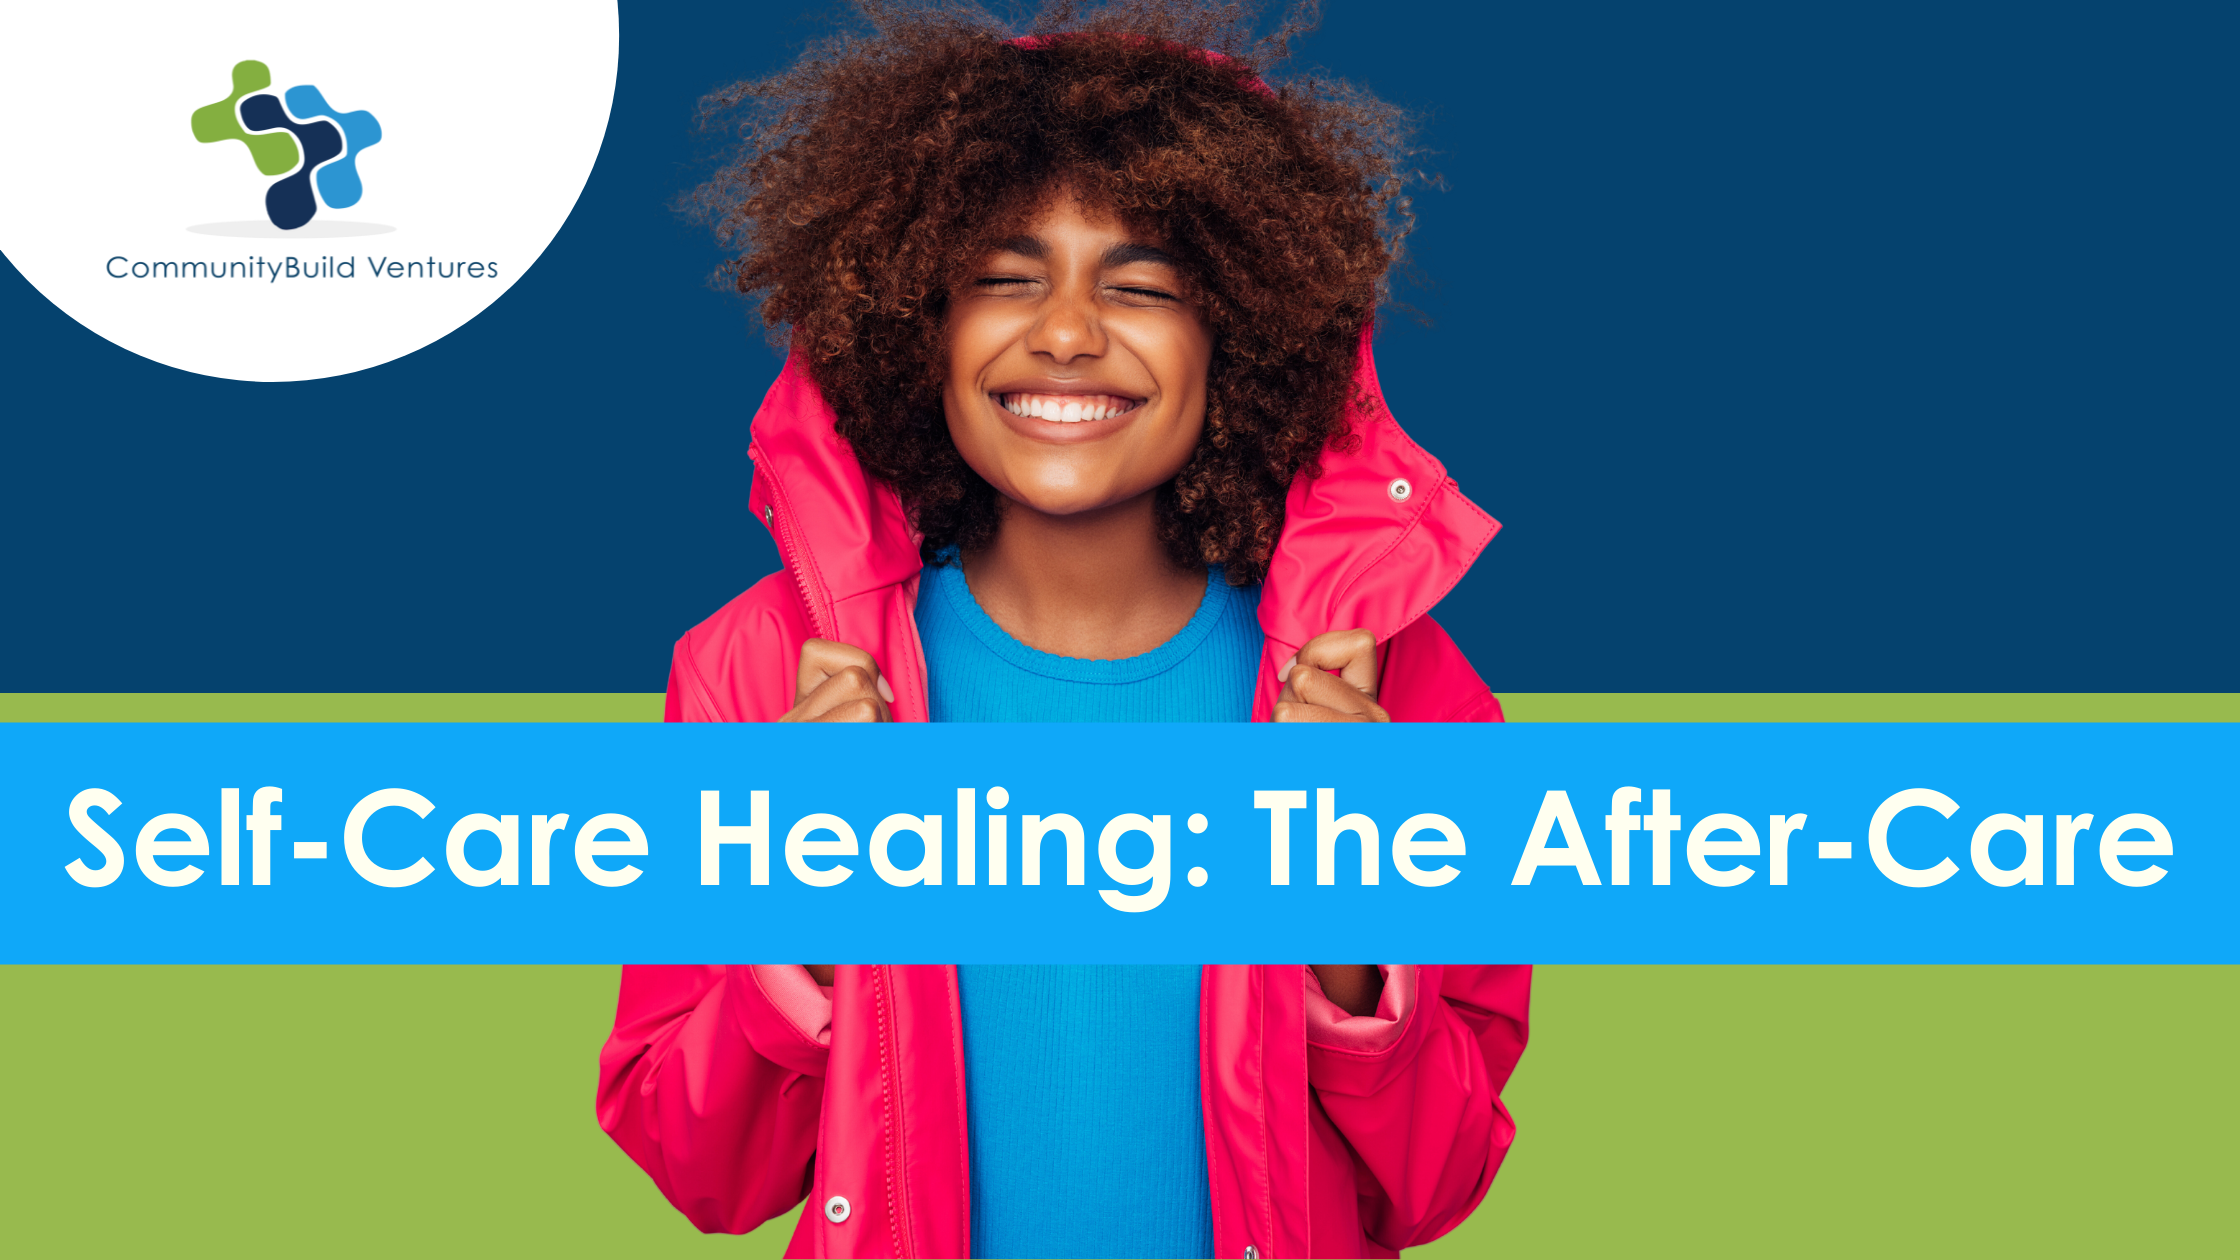 Self-Care Healing: The After-Care